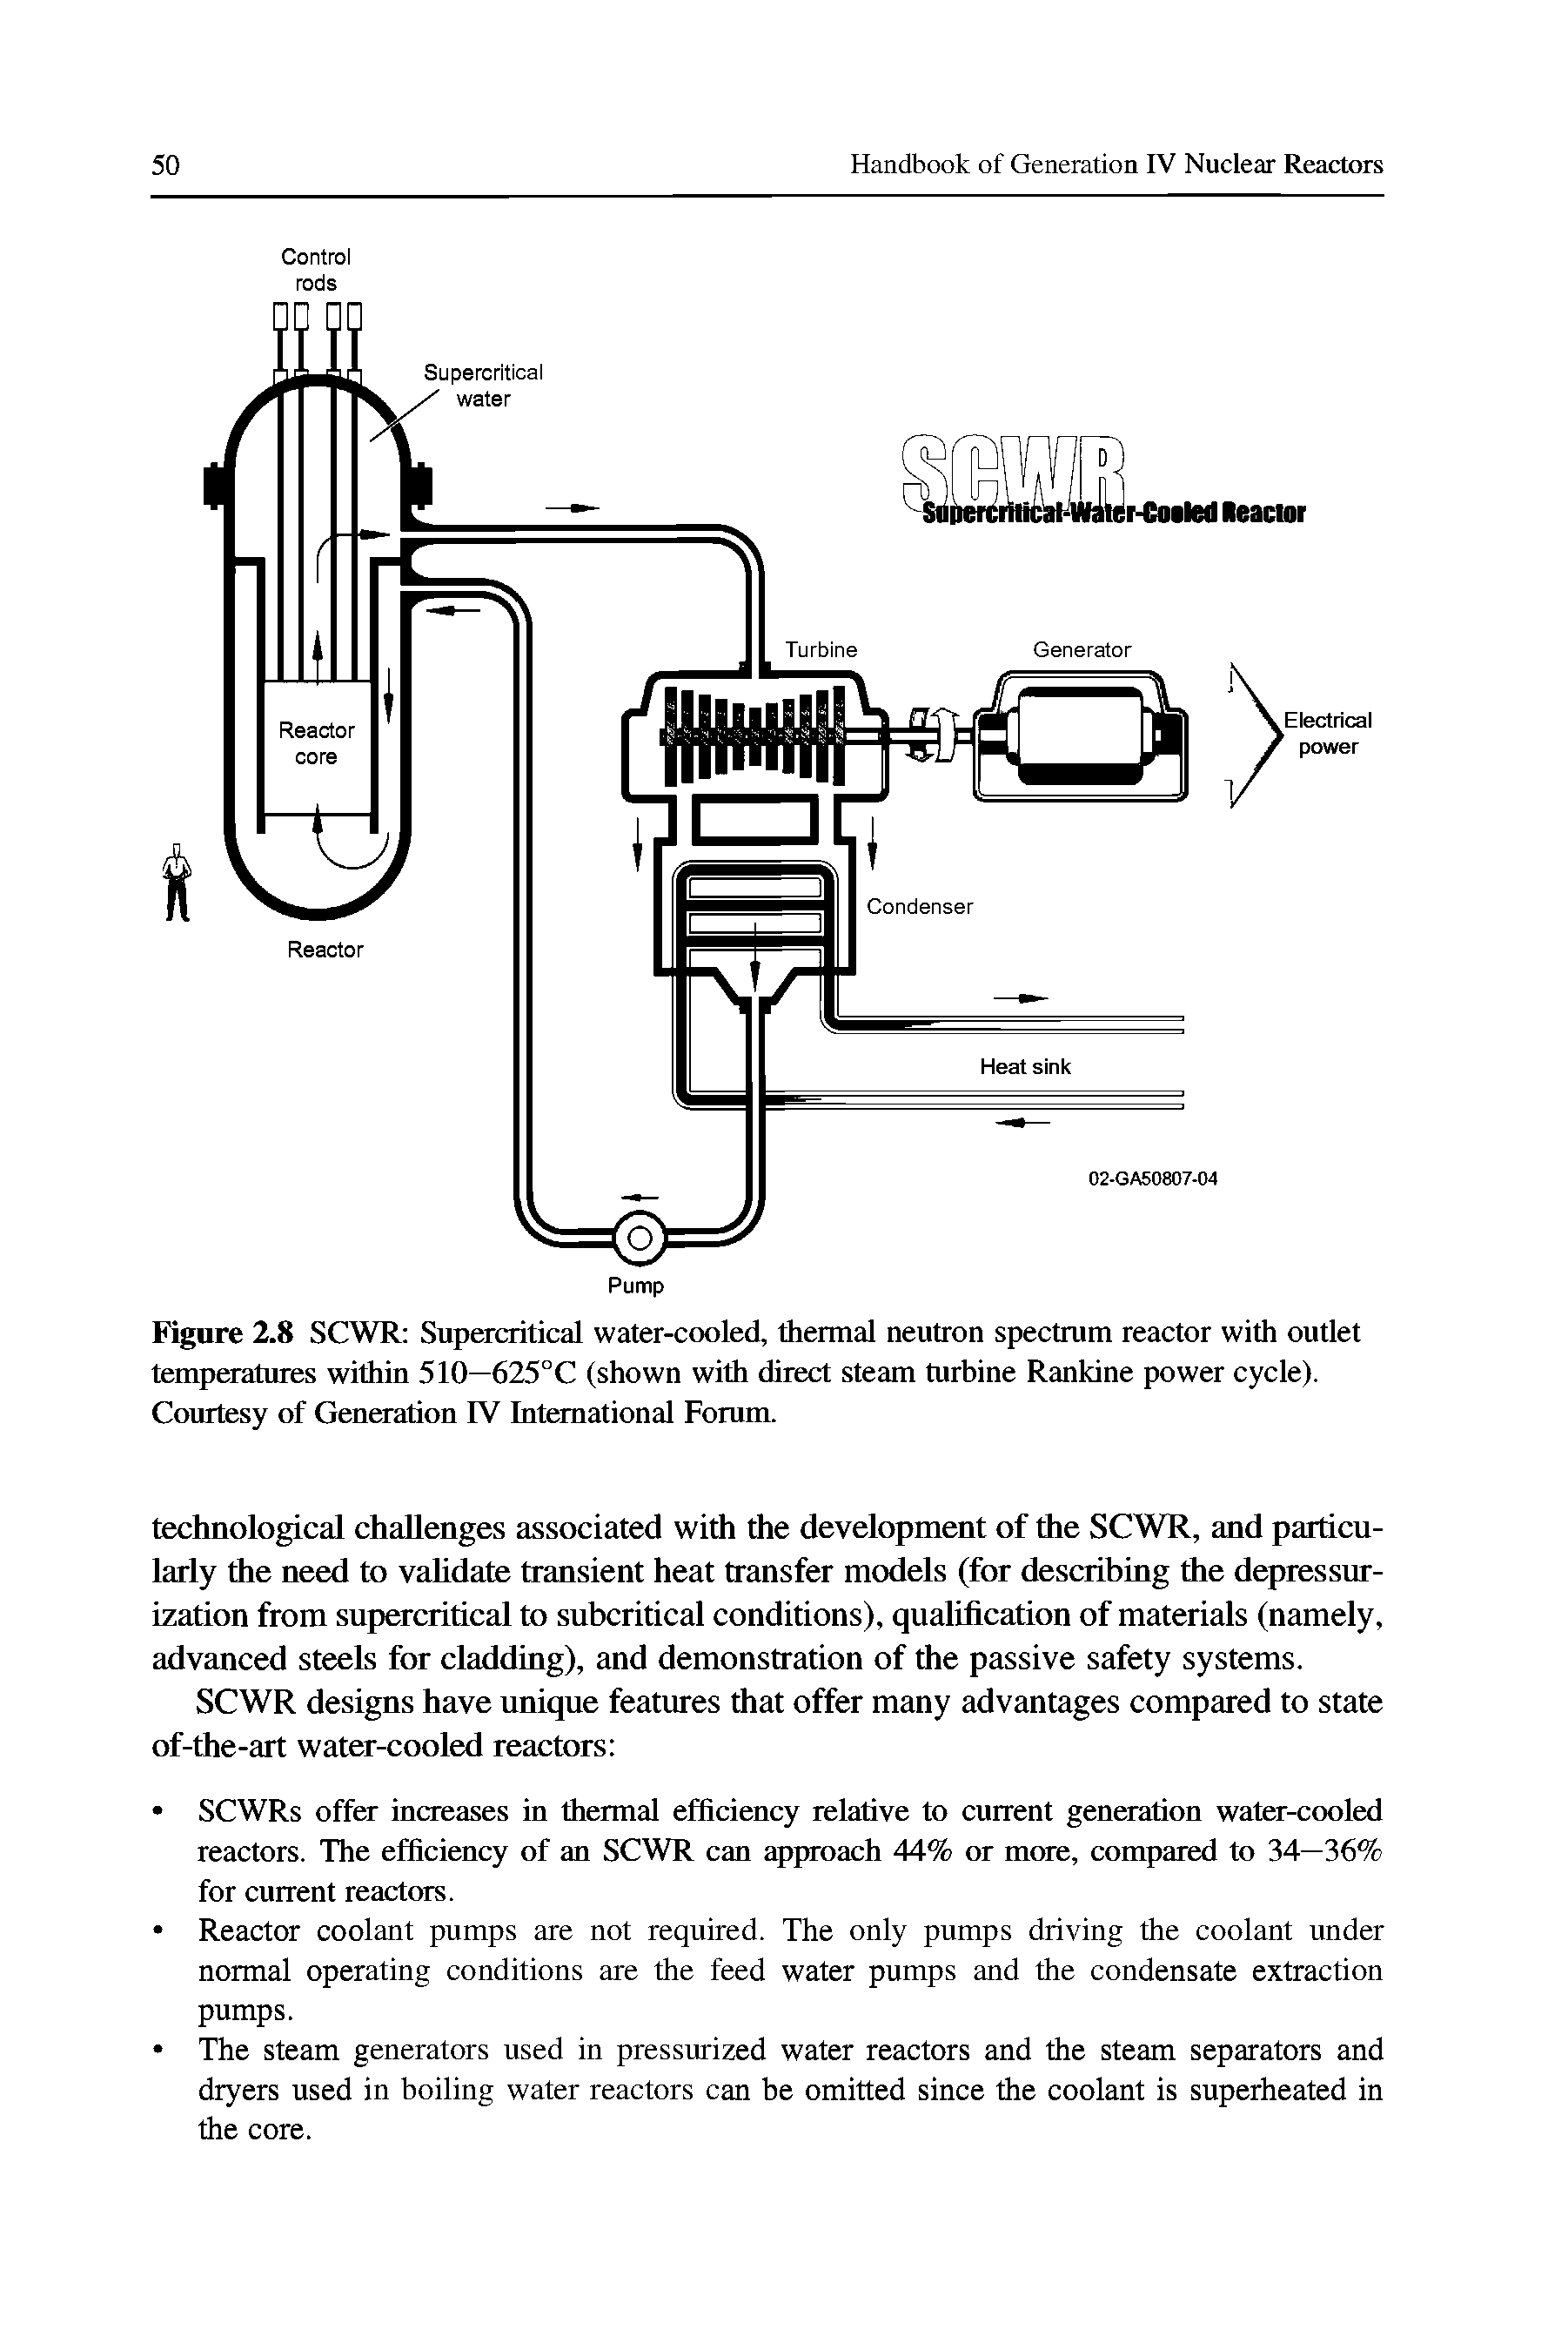 Figure 2.8 SCWR Supercritical water-cooled, thermal neutron spectrum reactor with outlet temperatures within 510—625°C (shown with direct steam turbine Rankine power cycle). Courtesy of Generation IV International Forum.